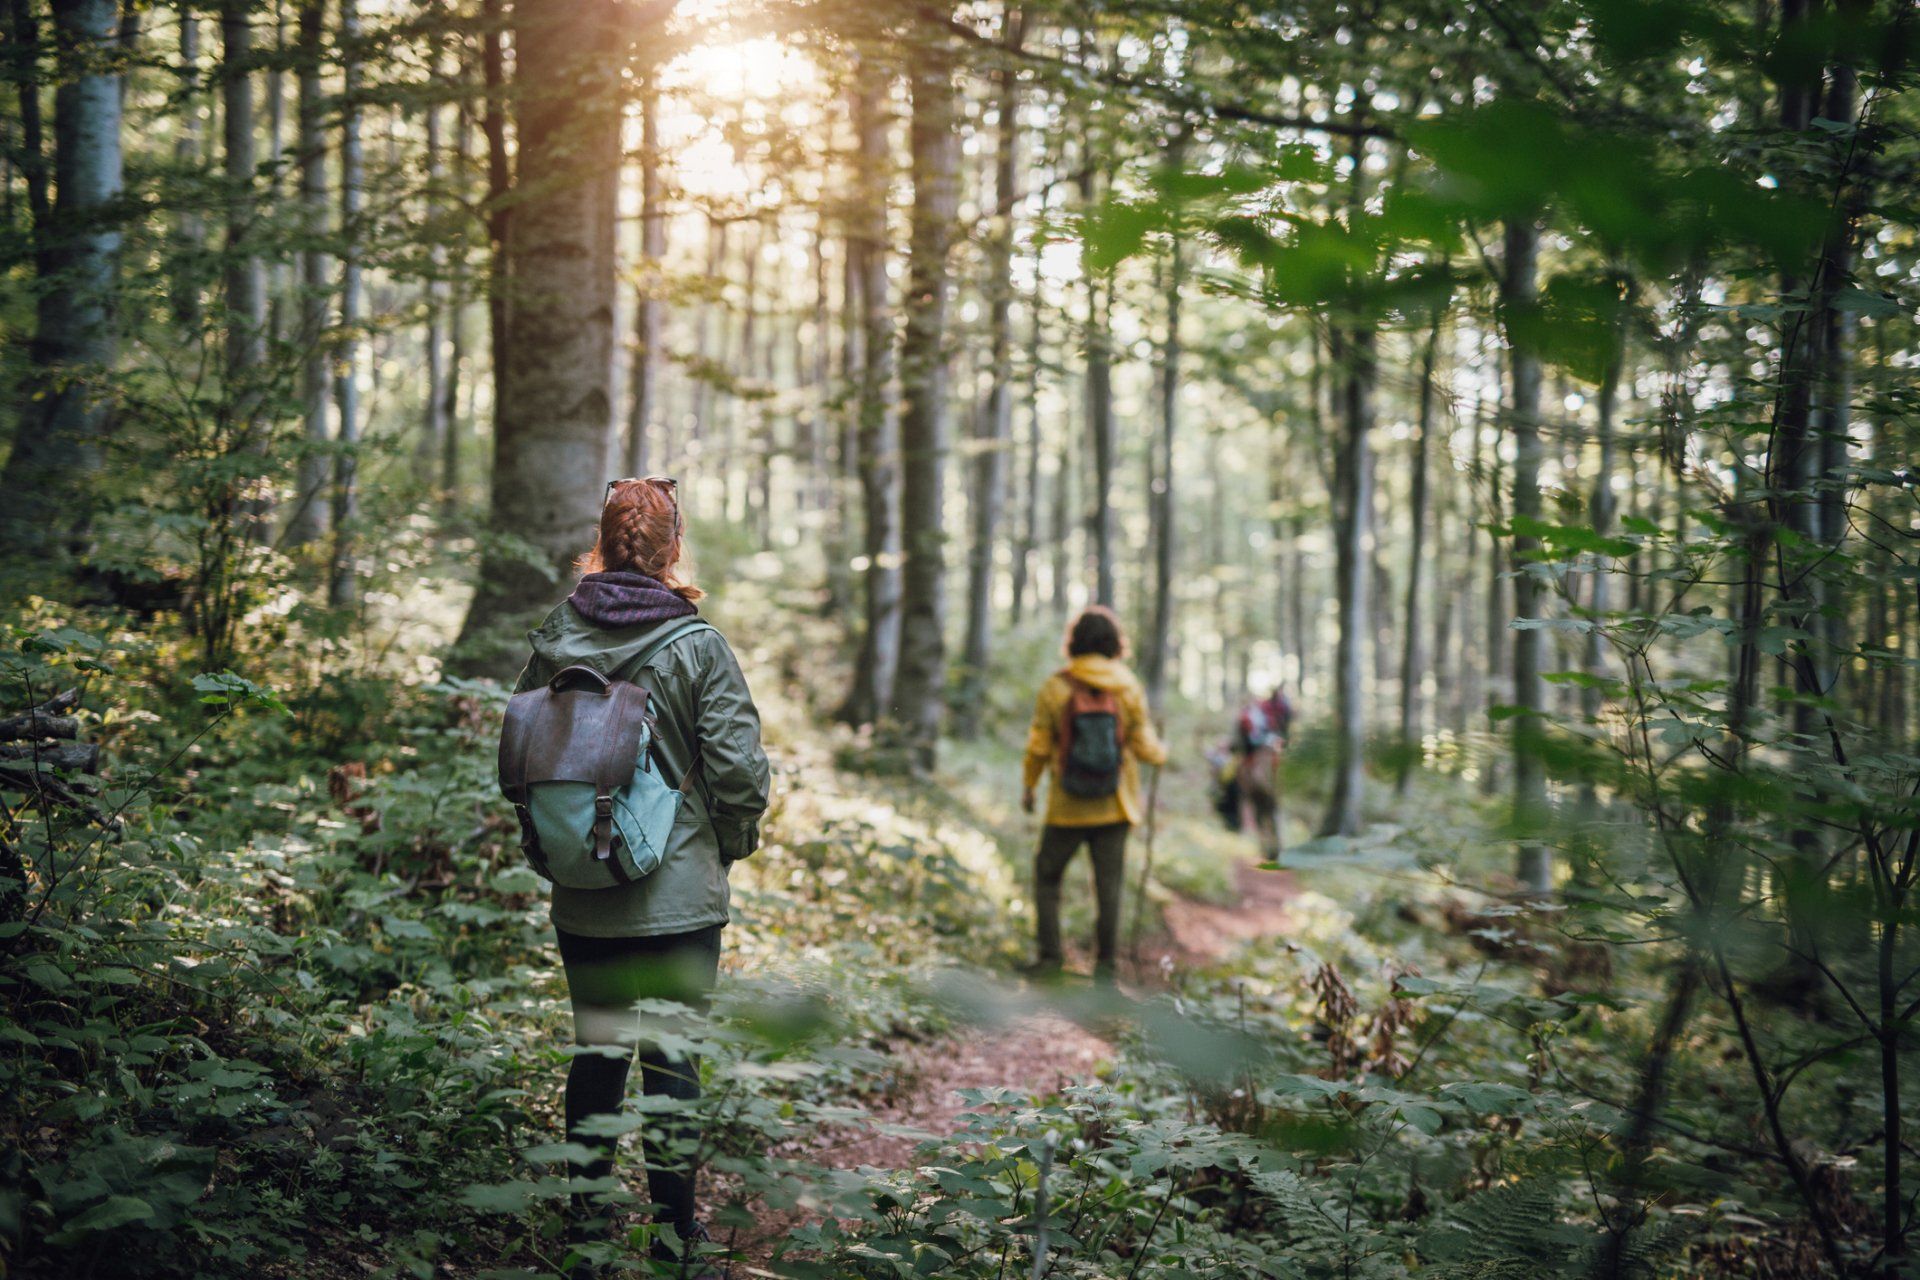 a group of people are walking through a forest .